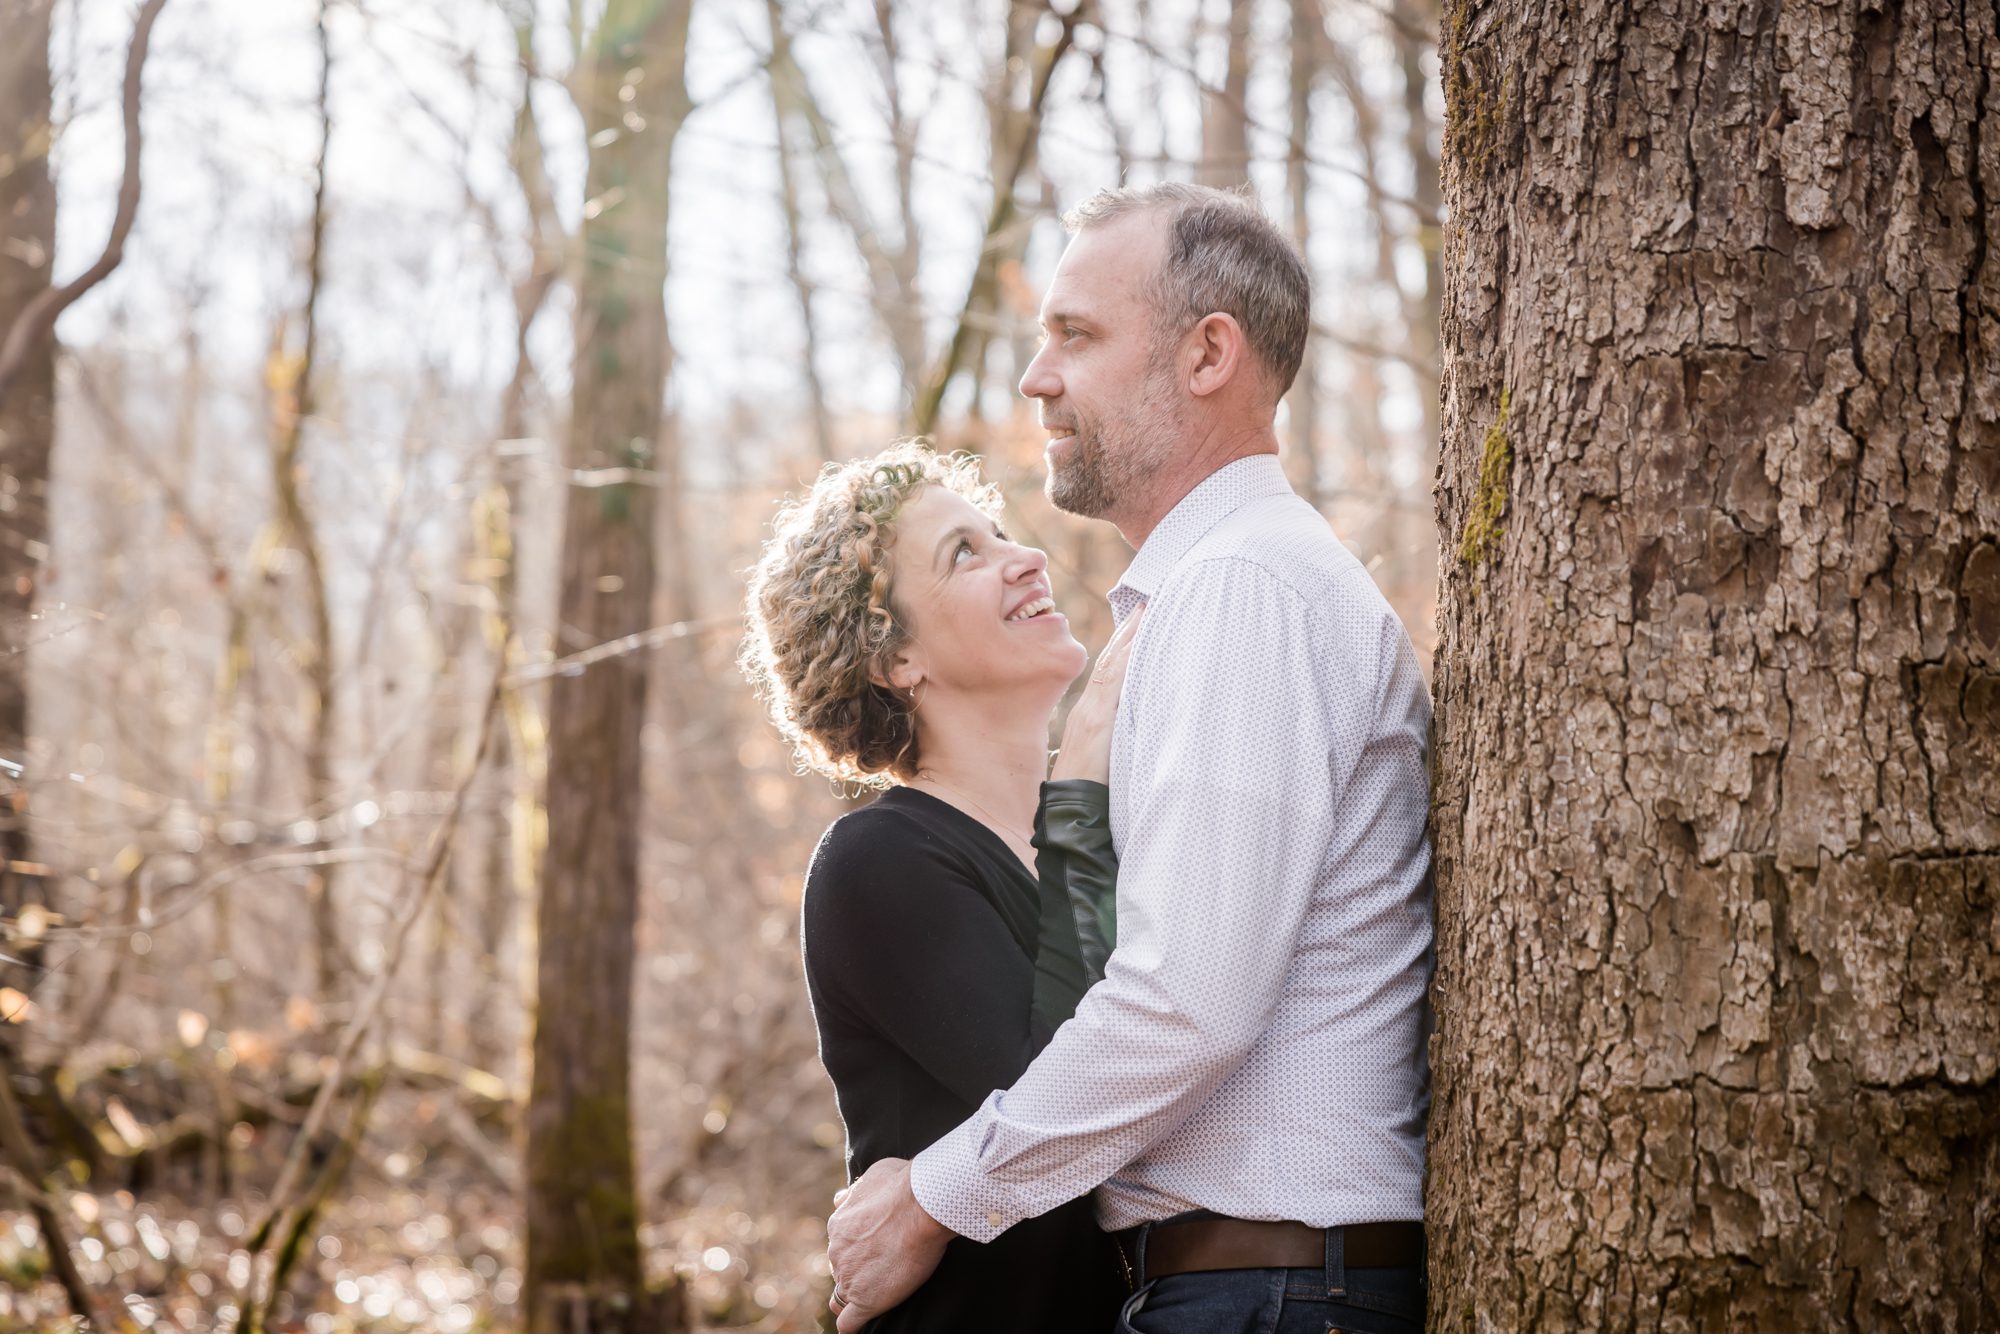 Quick and Simple Elopement